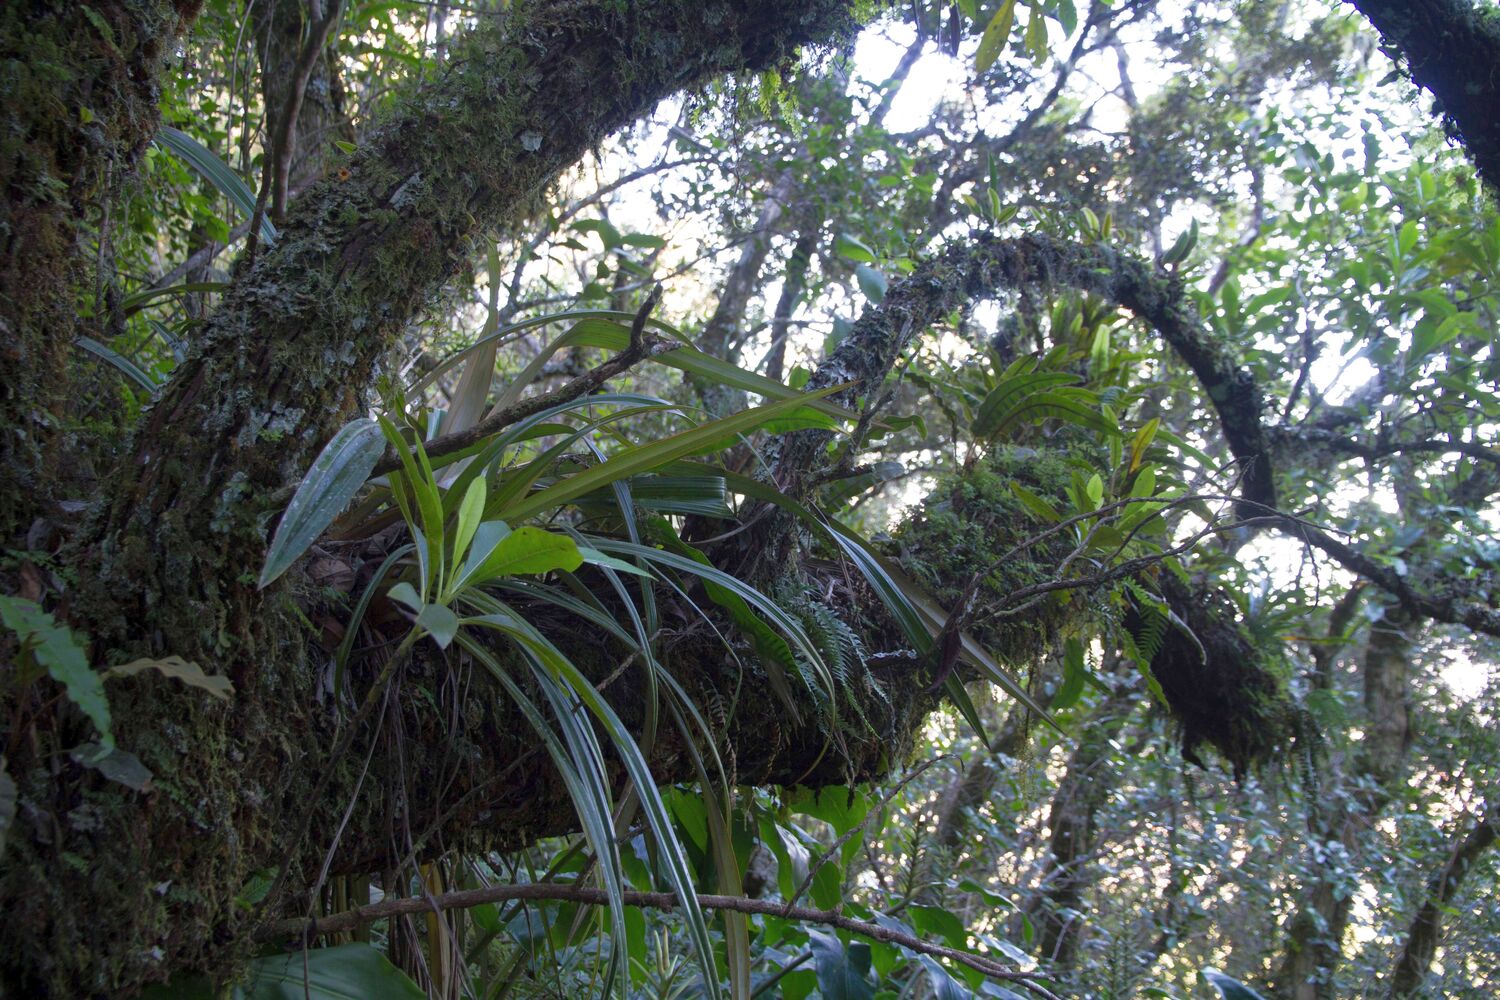 Moist tropical mountain forests like here on La Réunion are characterized by a rich epiphyte flora